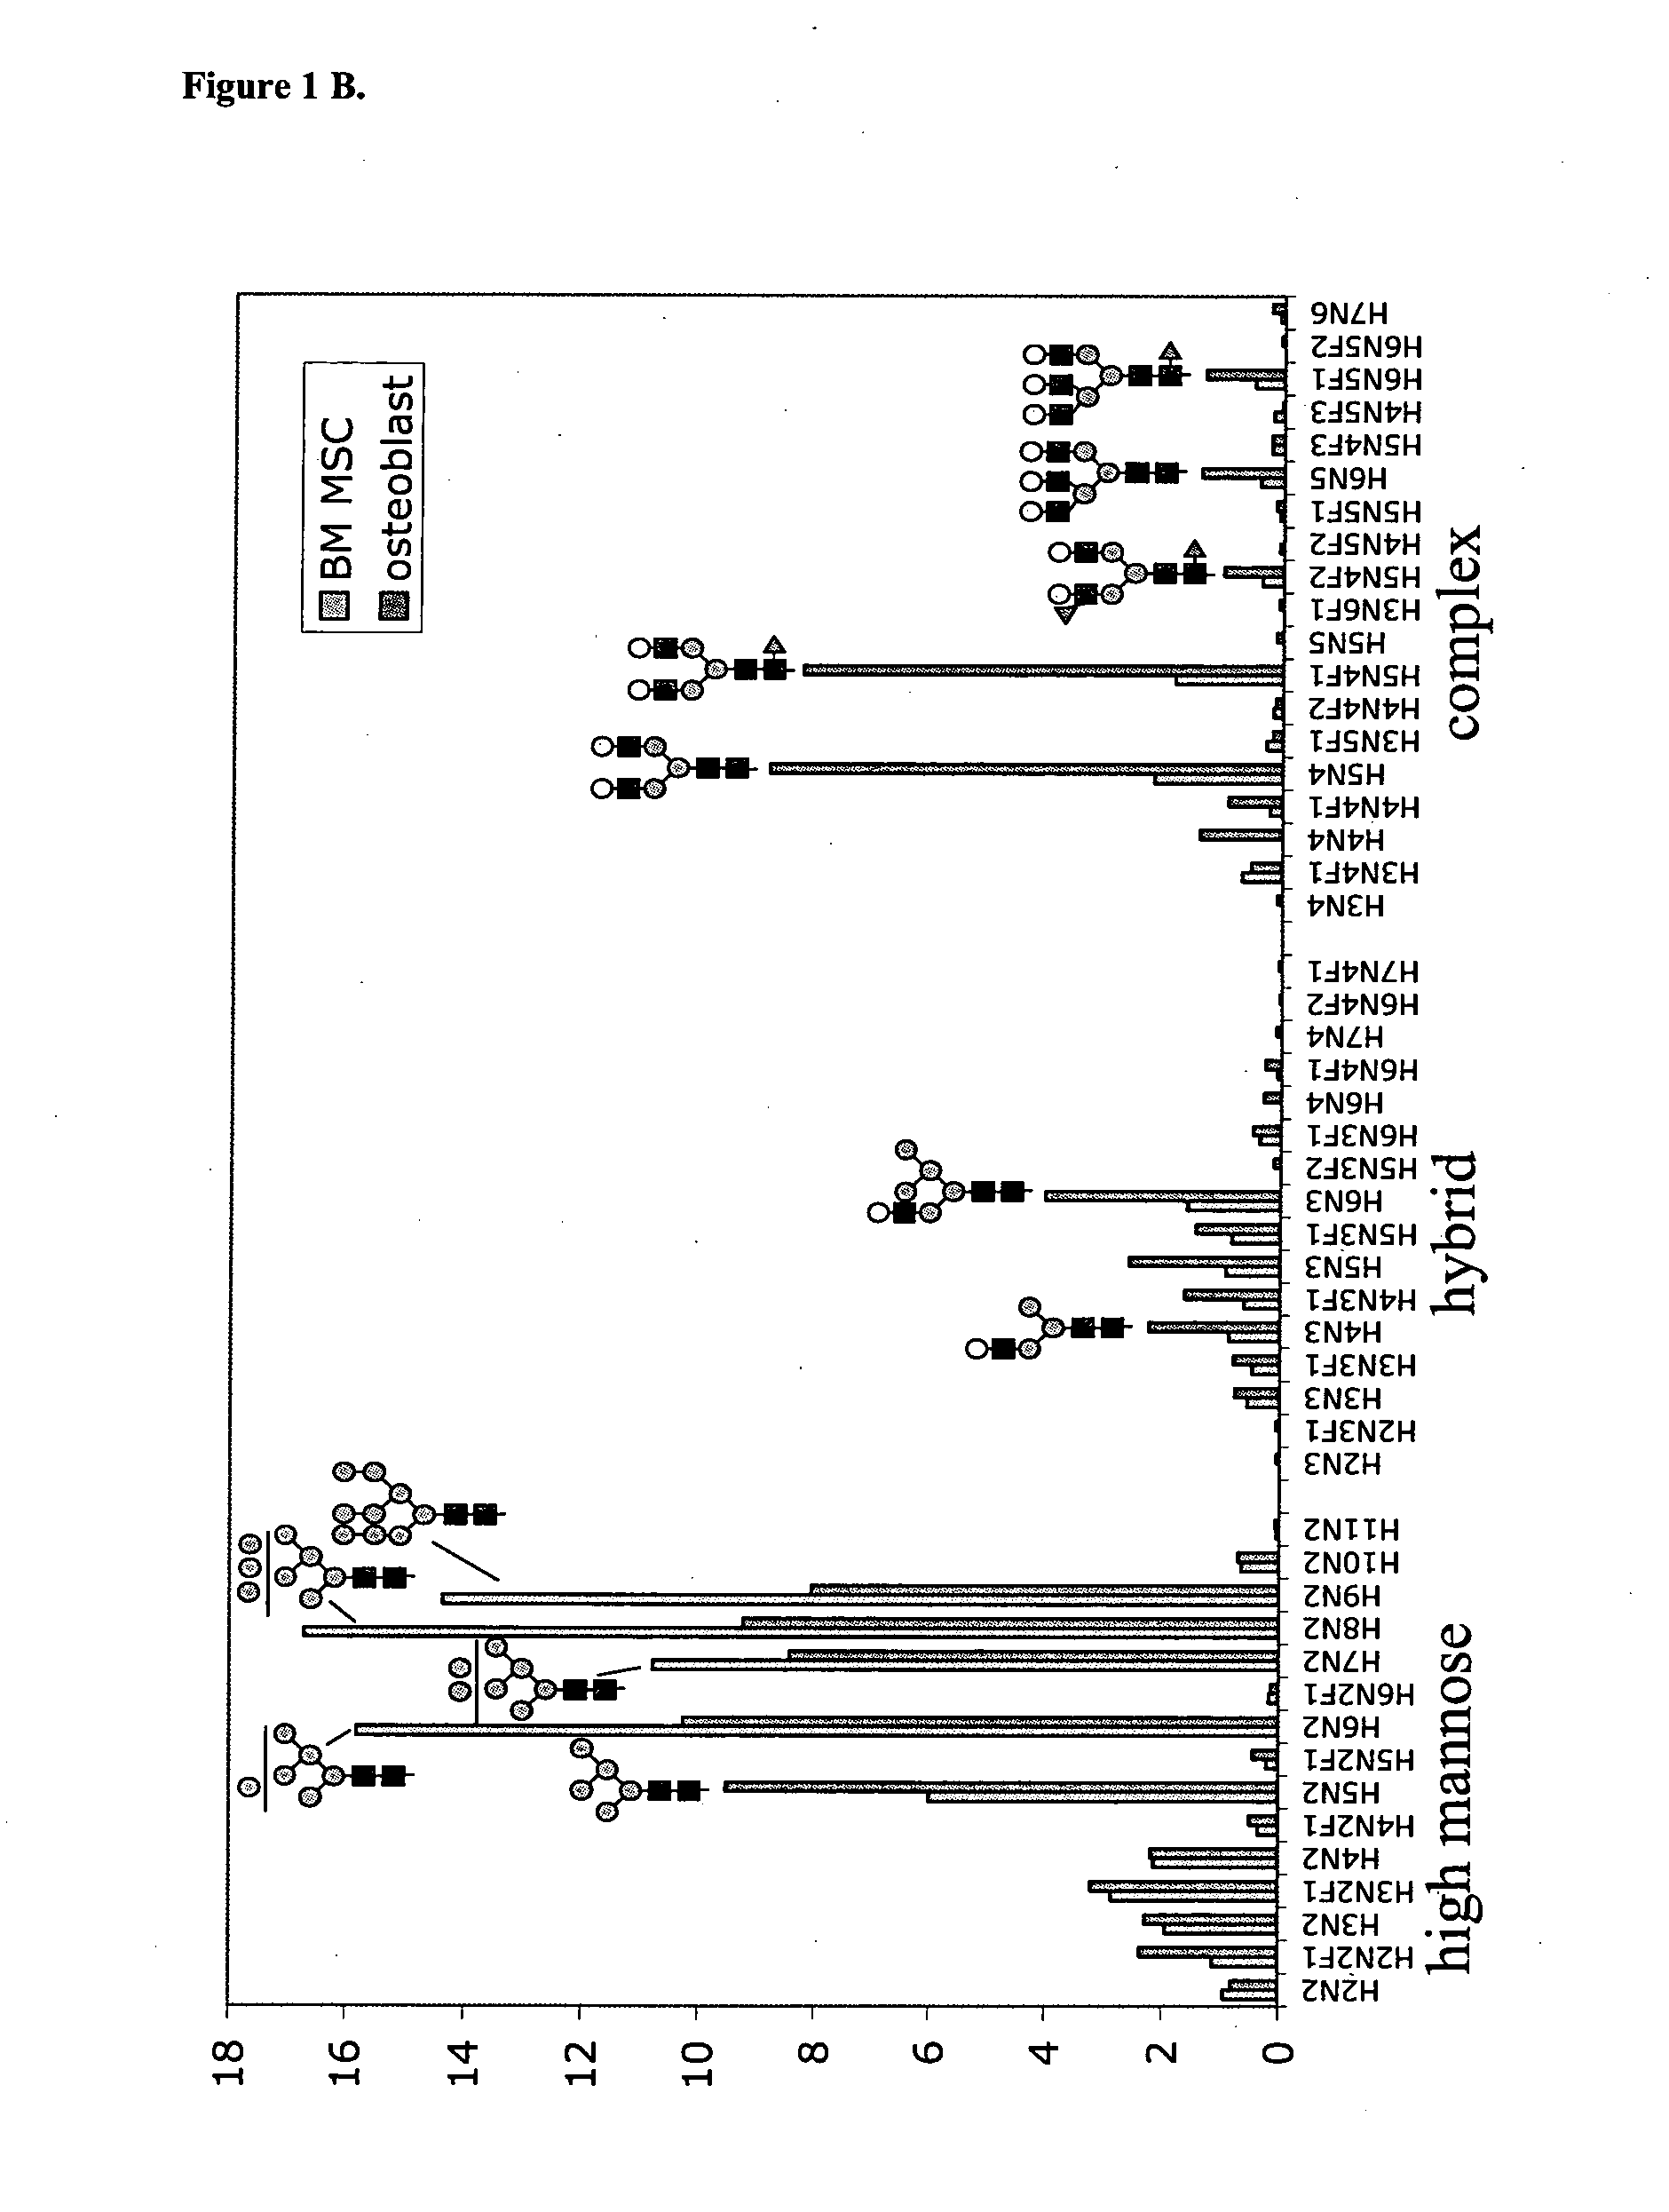 Novel specific cell binders